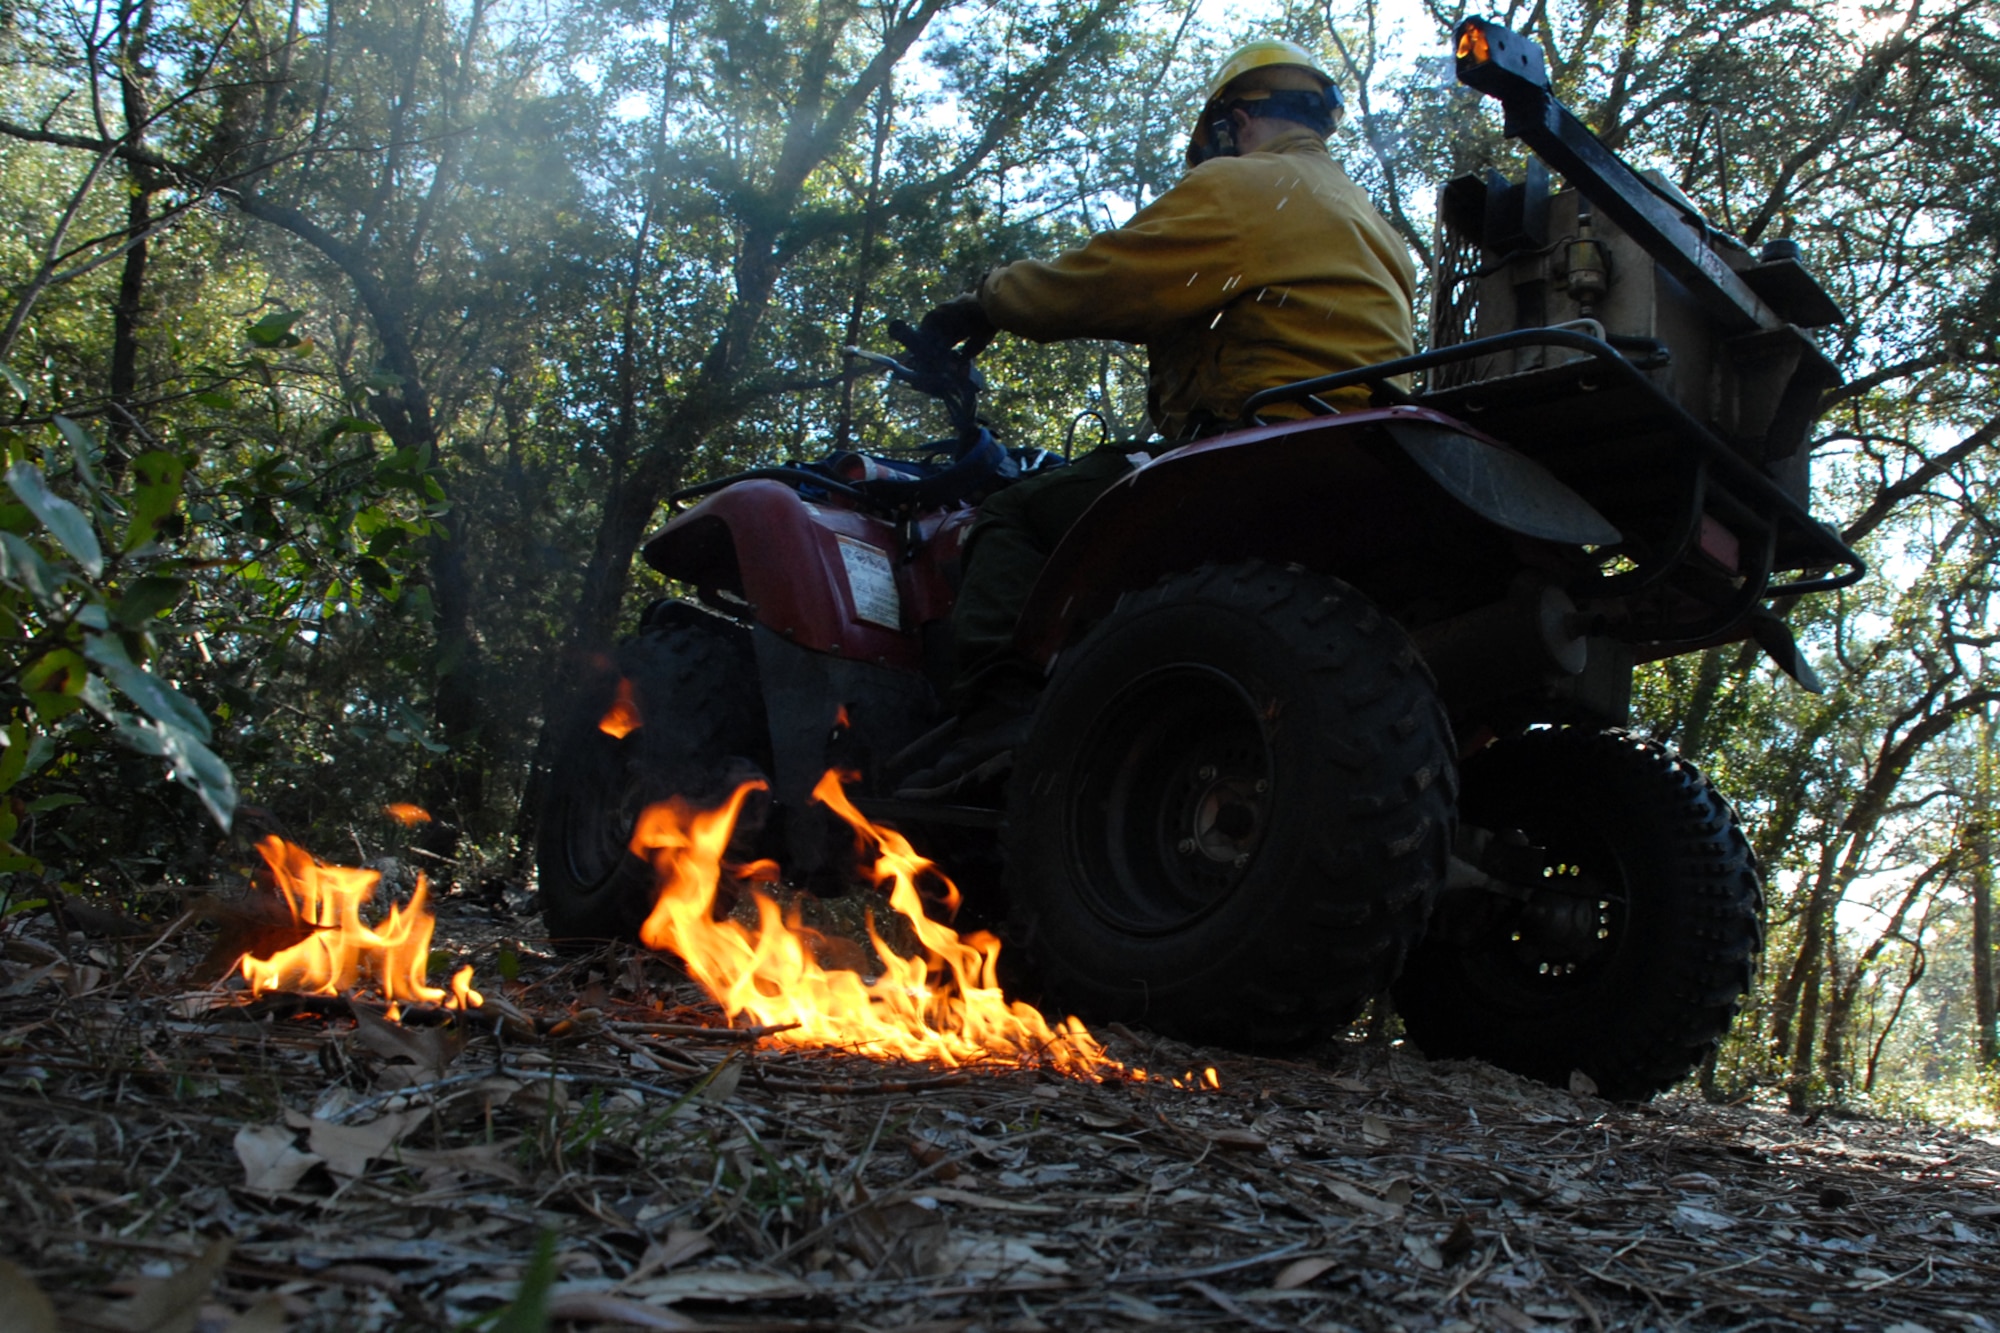 EGLIN AIR FORCE BASE, Fla. -- Tom Murrie, a Jackson Guard forestry technician and wildland fire specialist, uses a mixture of fuels in a drip line to spark a prescribed fire from an all terrain vehicle at White Point, an 85-acre recreation area on the Choctawhatchee Bay Jan. 29. Many native plants and animal species depend on Eglin's fire-dependent long-leaf pine ecosystem, 11 of which are federally protected. Endangered species such as the red-cockaded woodpecker, depend on fire that is typically caused by either lightning strikes or Eglin's resident fire managers to survive. As of the 2008 control burn season, Jackson Guard's five-year average is 73,000 acres burned annually. (U.S. Air Force Photo by Staff Sgt. Mike Meares)